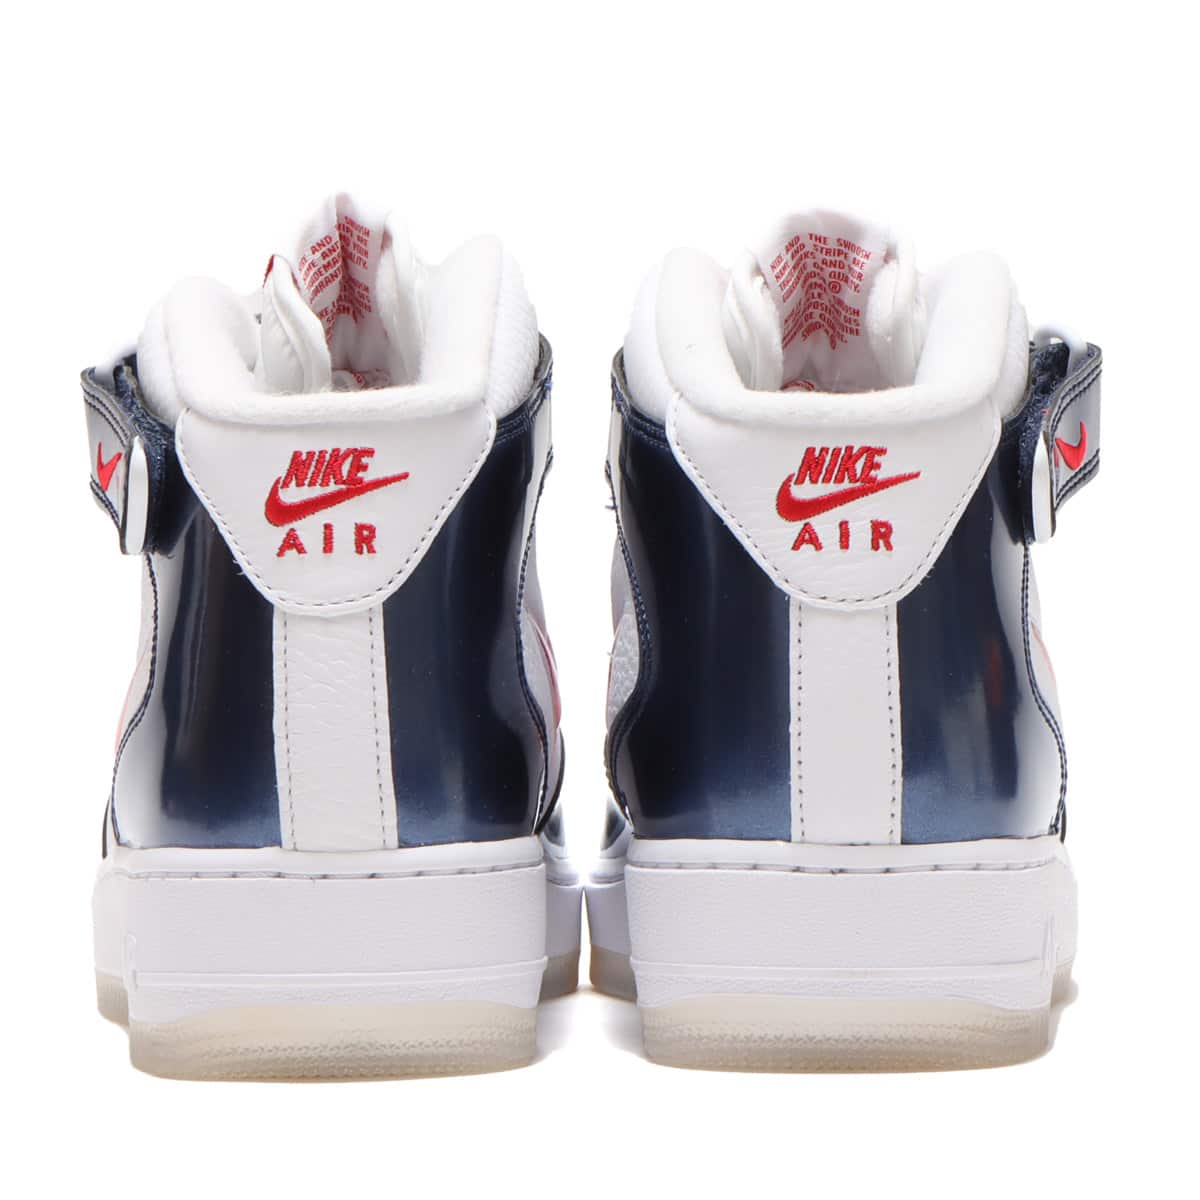 NIKE AIR FORCE 1 MID QS WHITE/UNIVERSITY RED-MIDNIGHT NAVY-WHITE ...